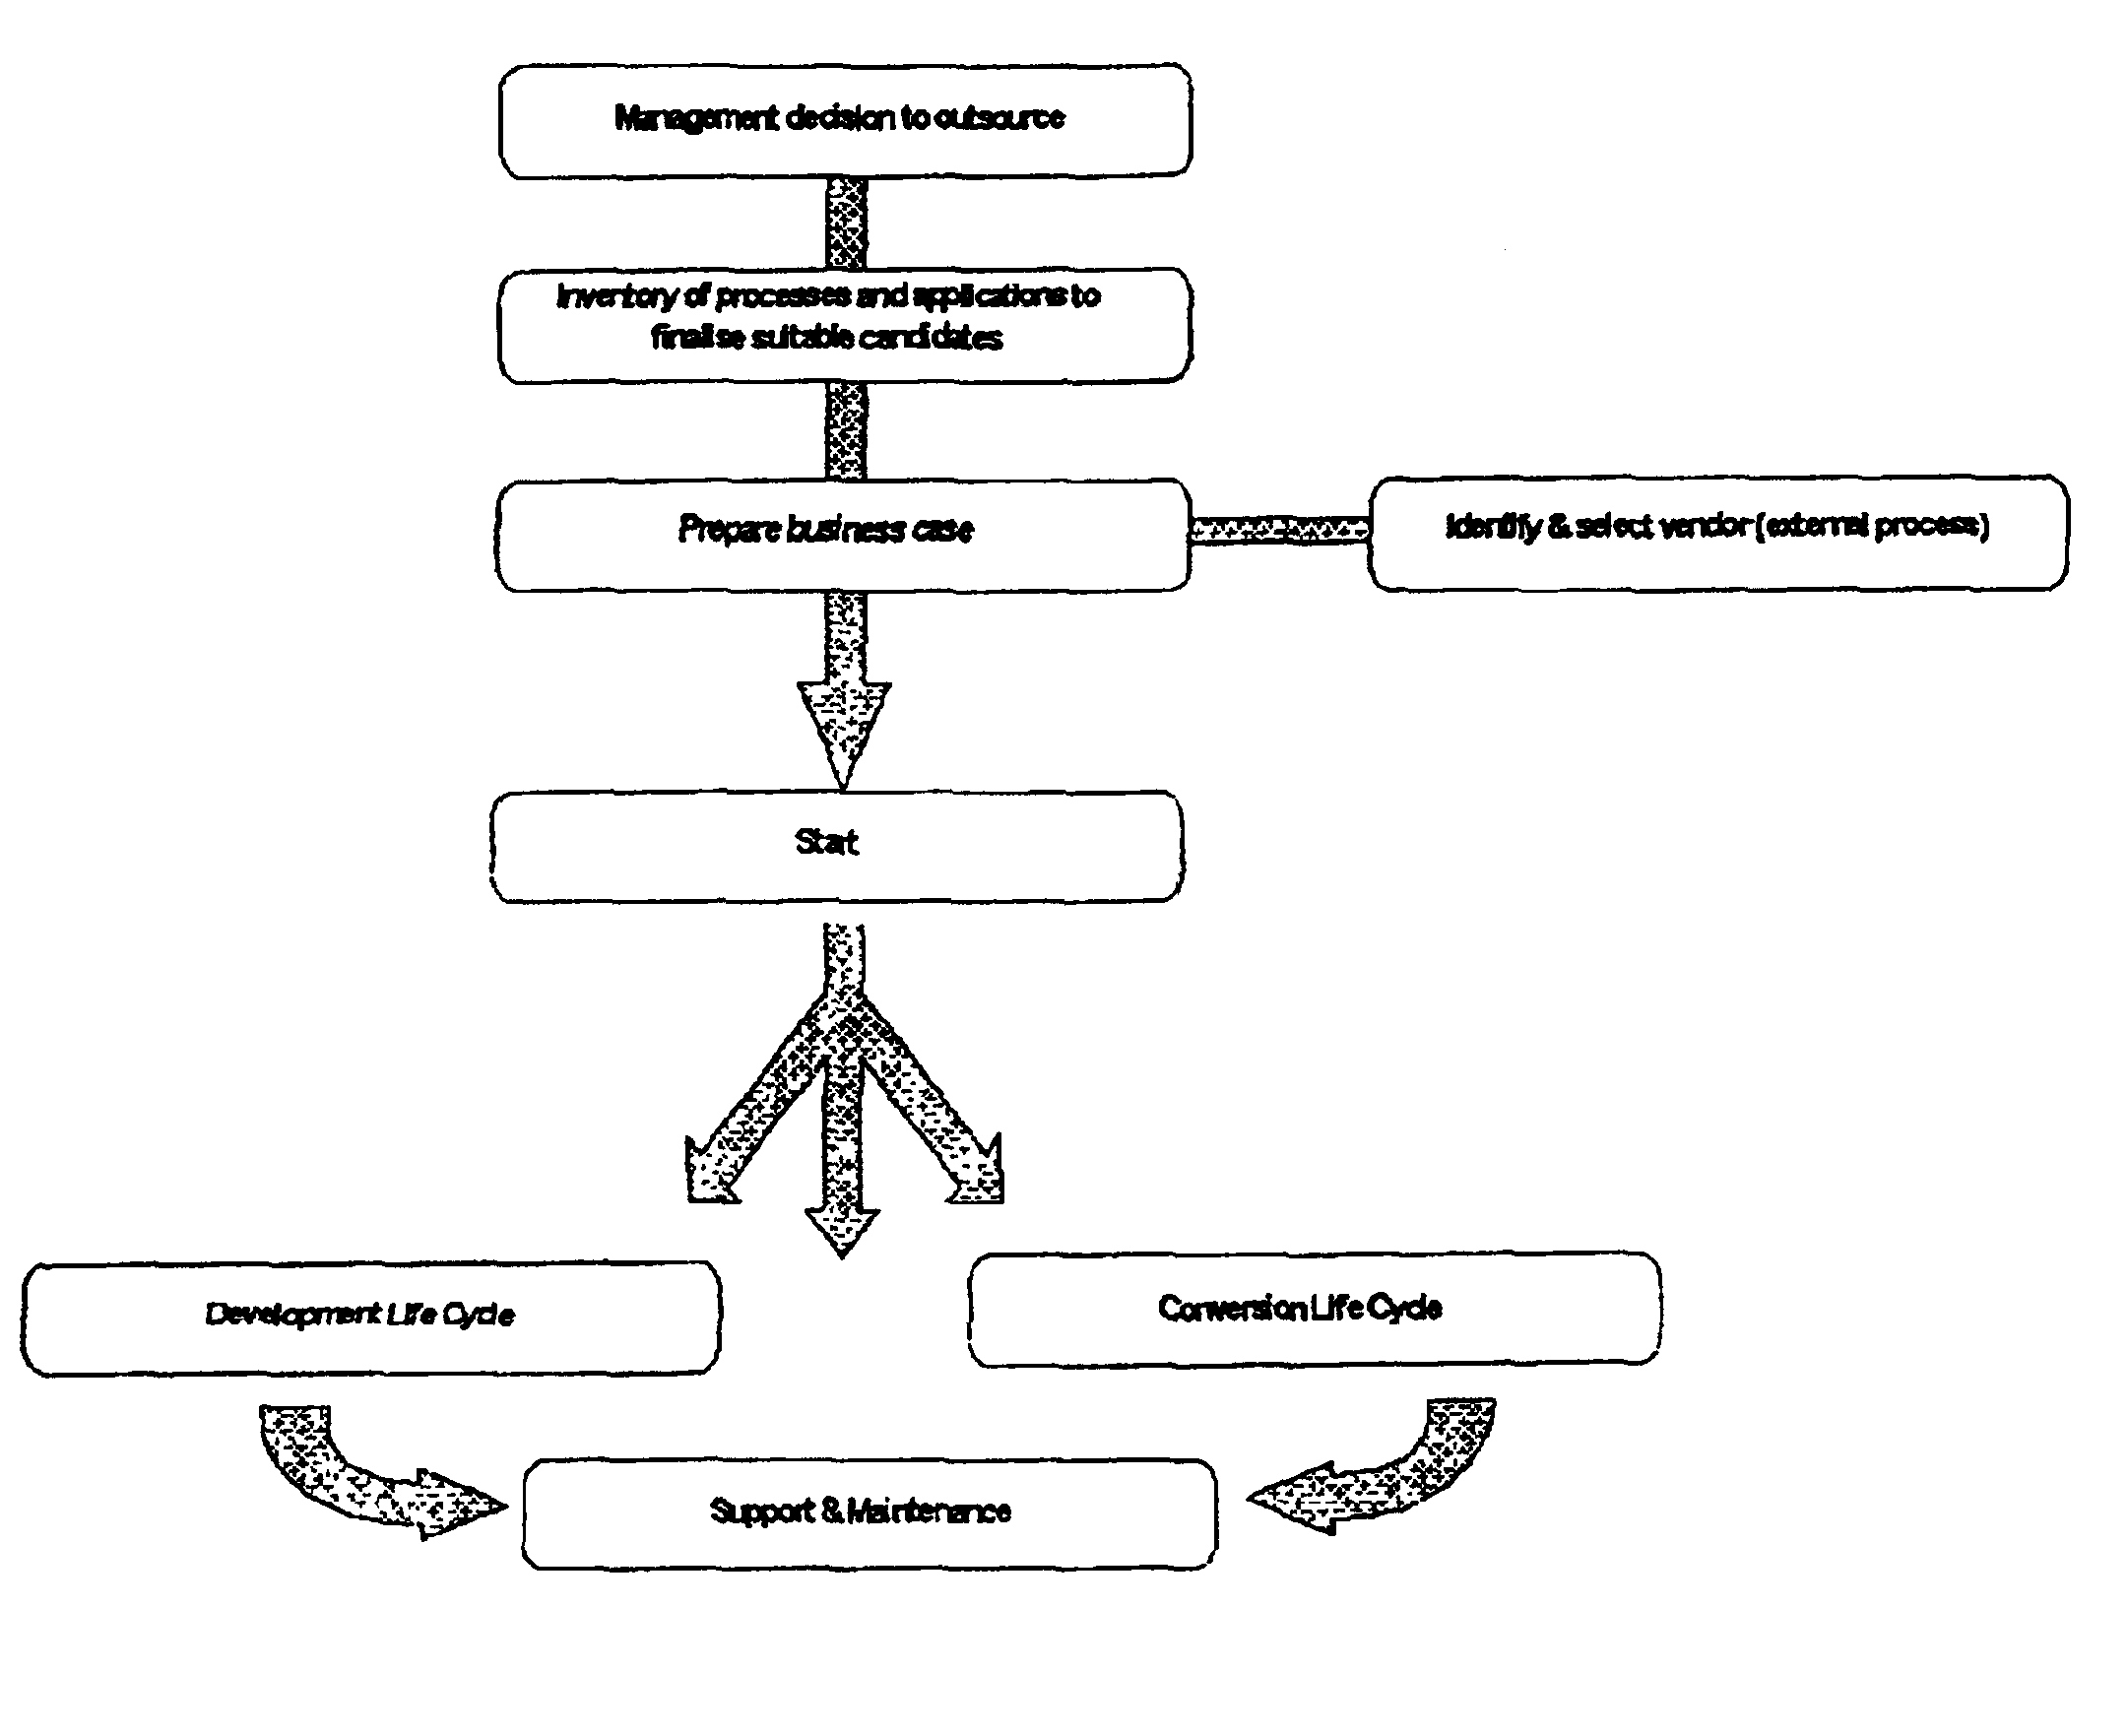 Method for arriving at an optimal decision to migrate the development, conversion, support and maintenance of software applications to off shore/off site locations